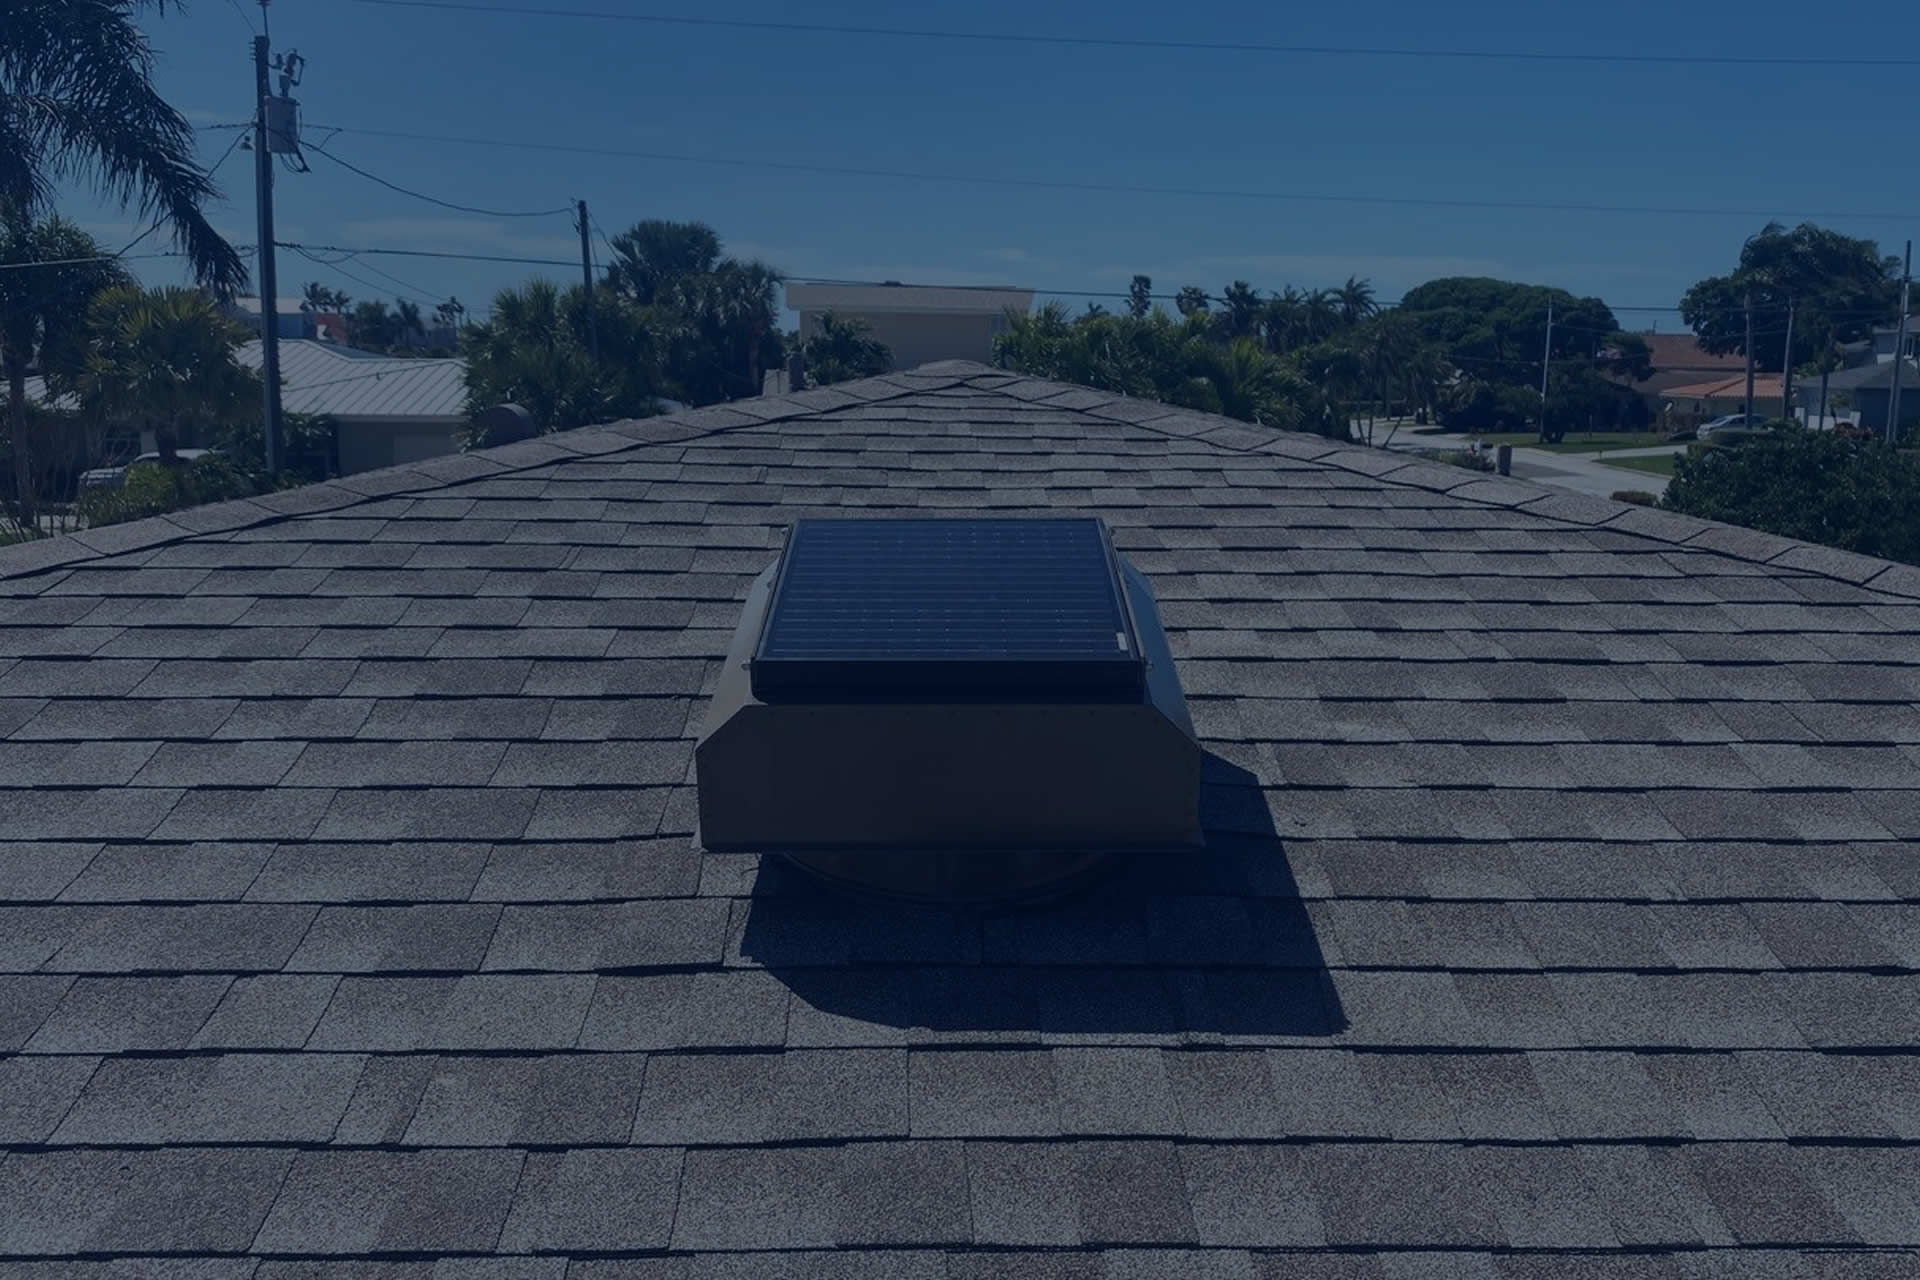 A solar attic vent will effectively cool your attic and save you money on summer cooling bills.